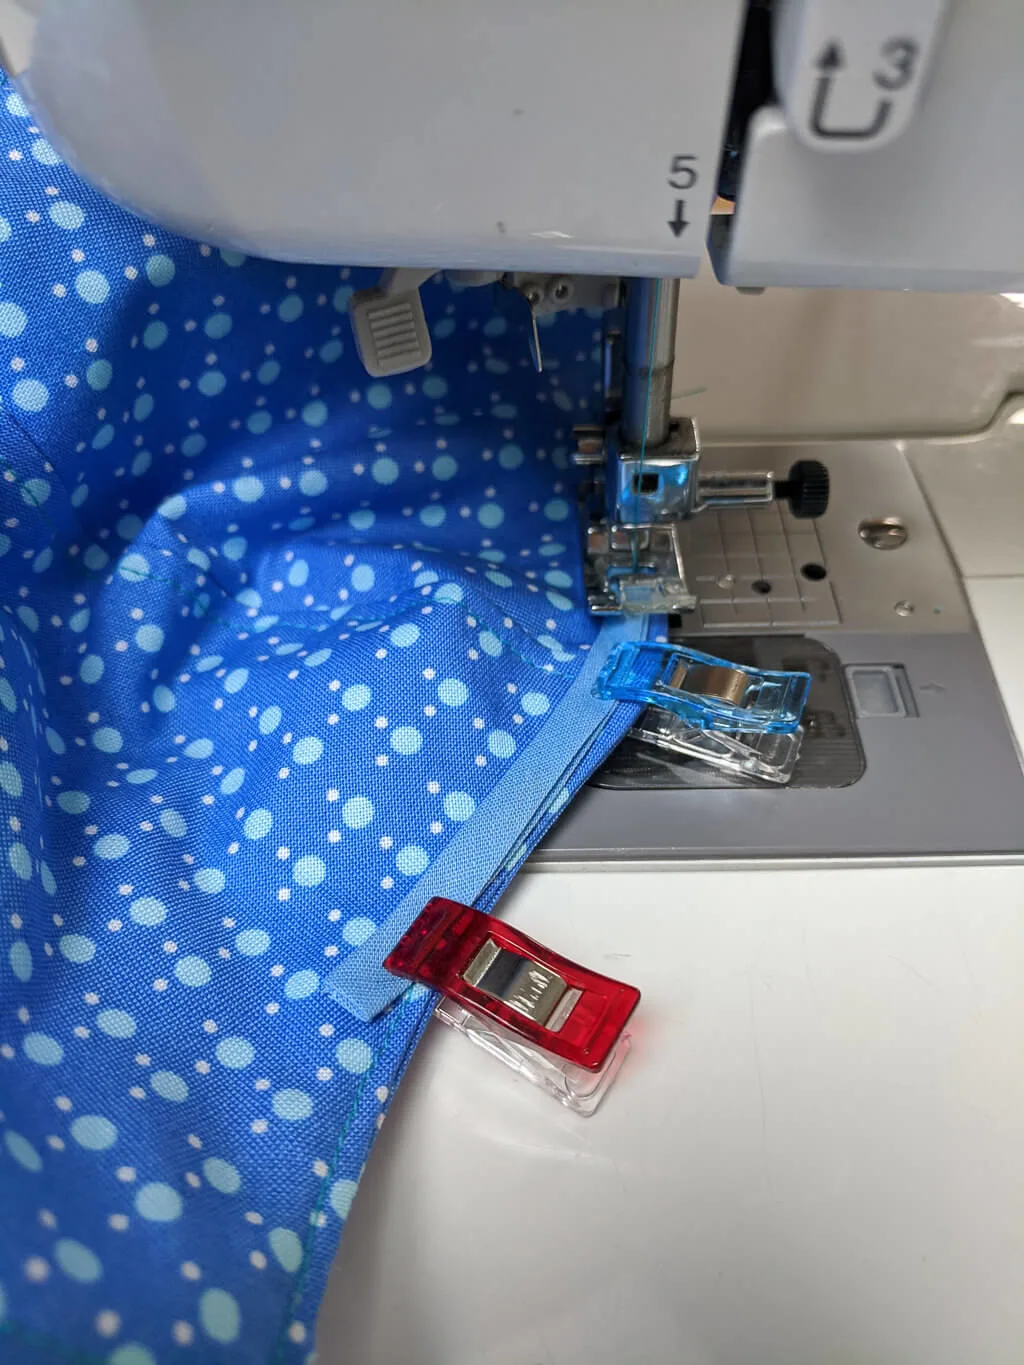 Sewing bias tape onto a DIY fabric face mask